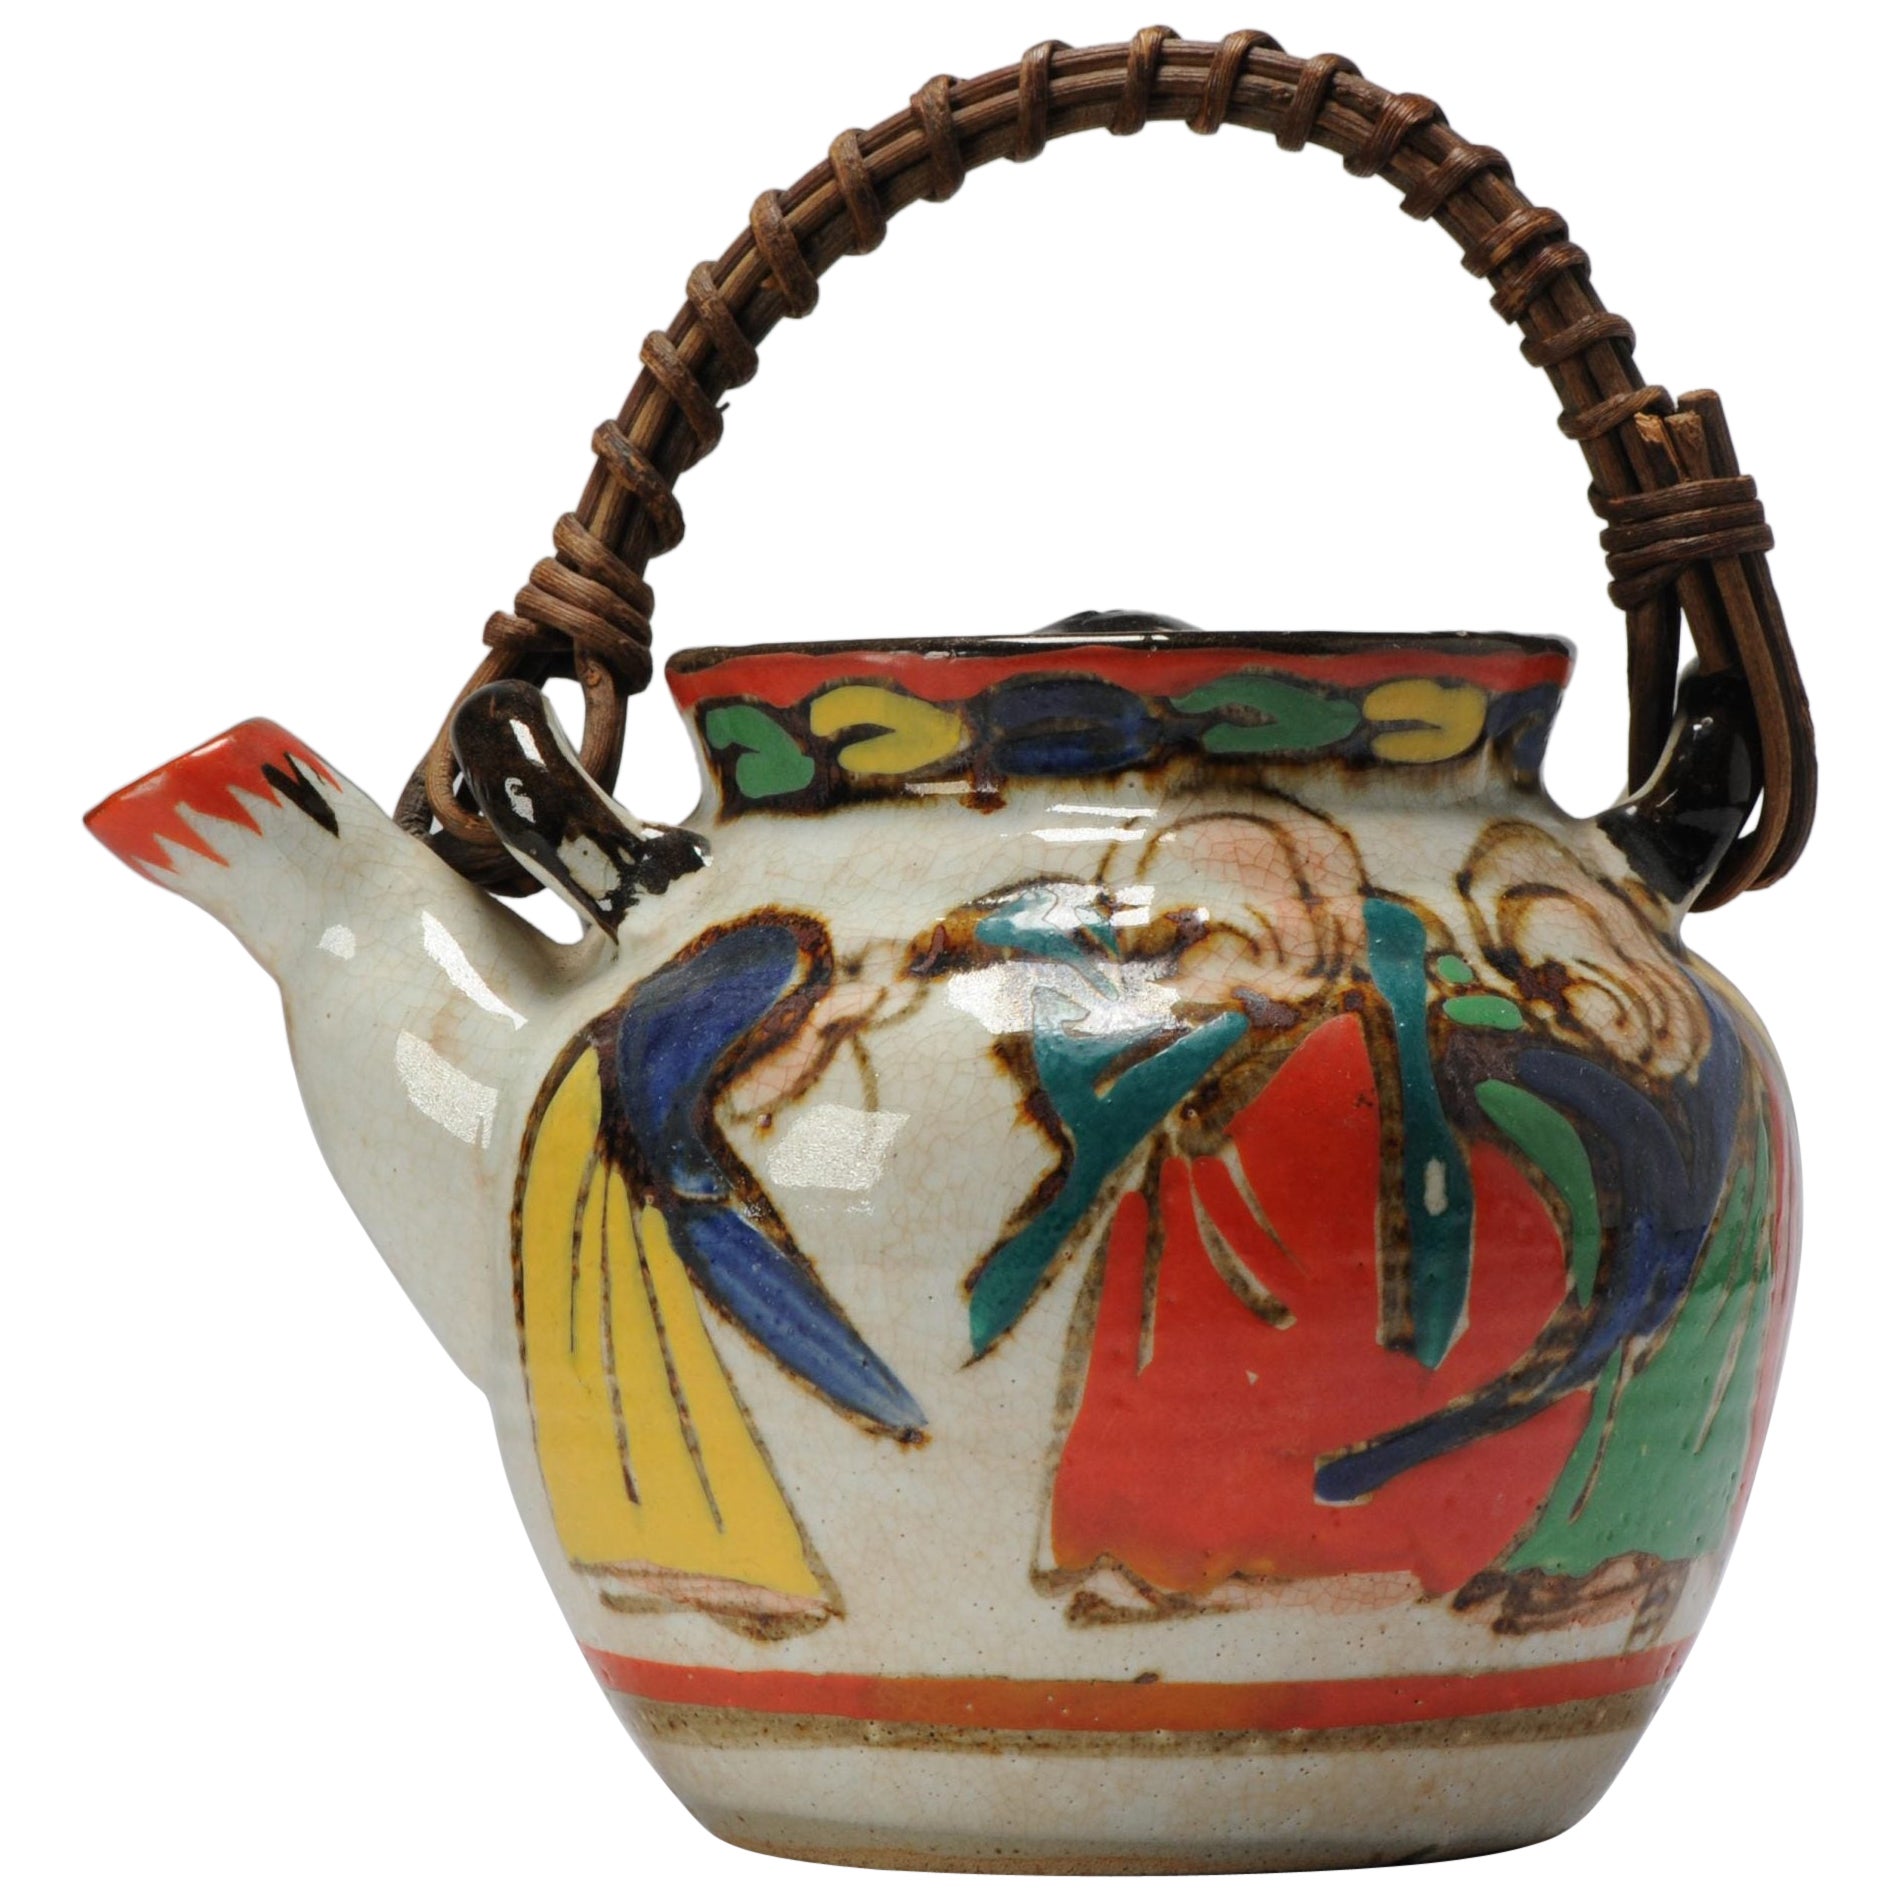 Antique/Vintage Colorfull Teapot with Figures and Handle, 20th Century For Sale